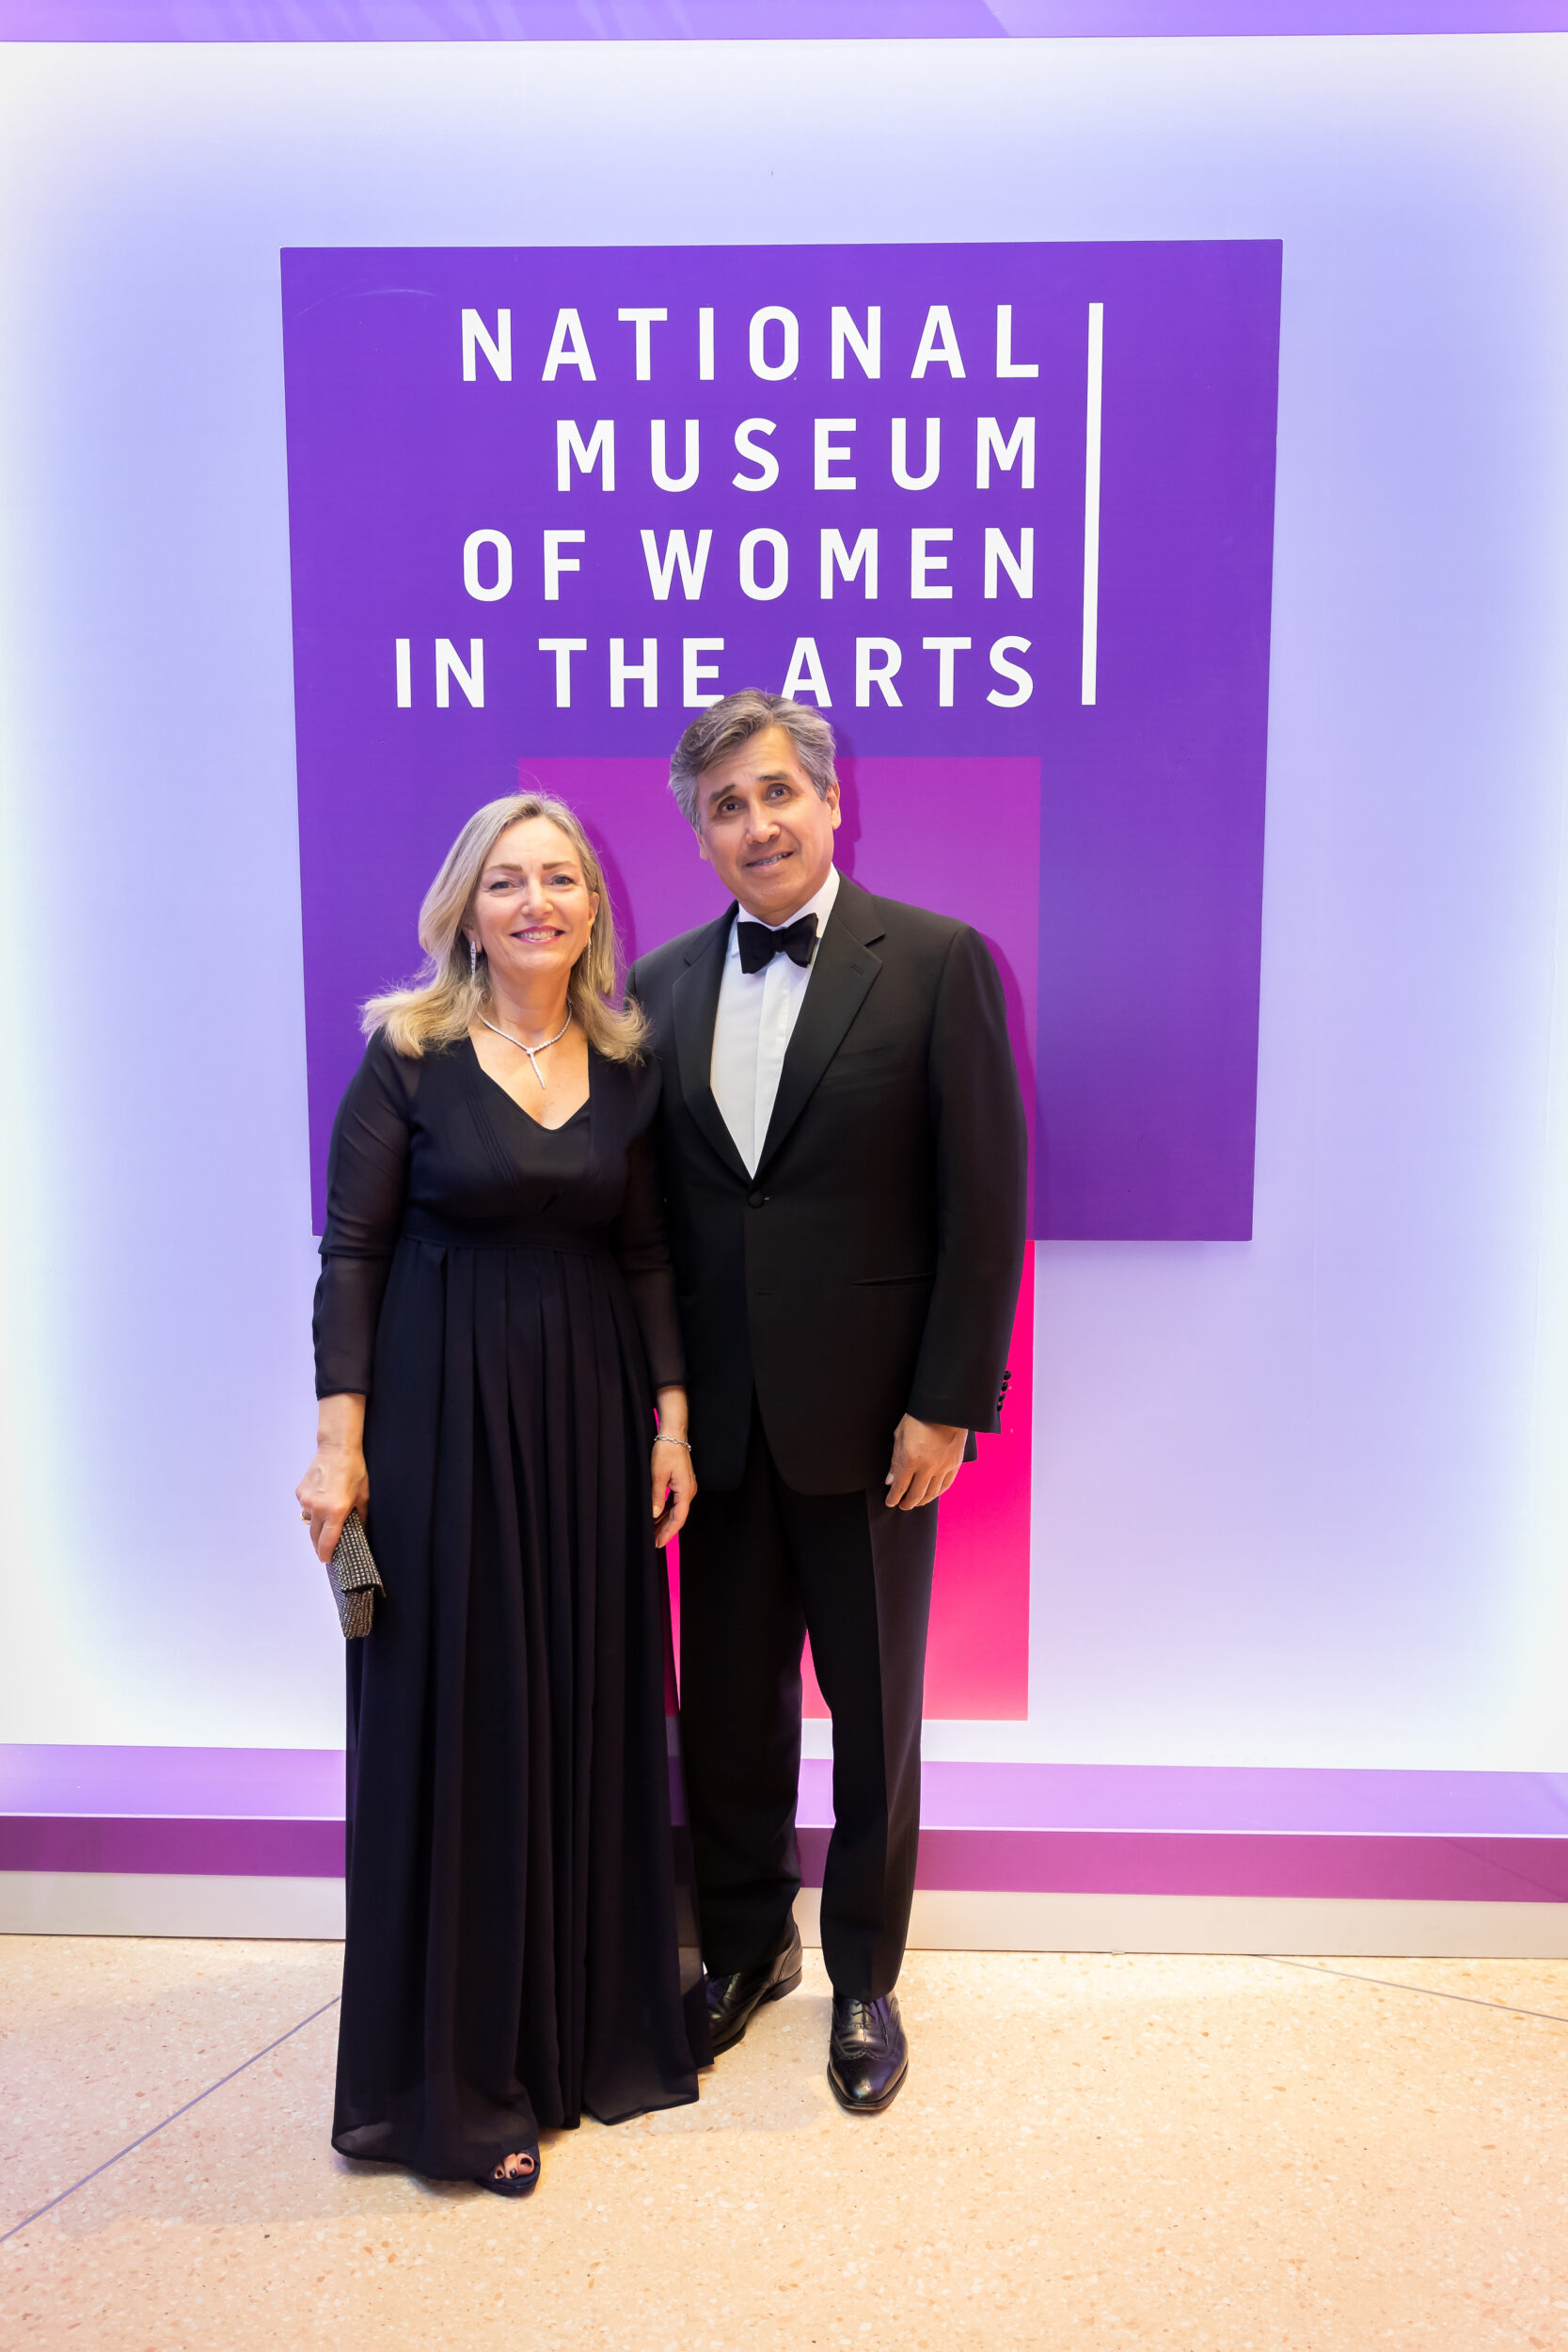 A light-skinned man and woman pose for a photo at a black-tie event. Behind the couple is a colorful backdrop with the National Museum of Women in the Arts logo on it.